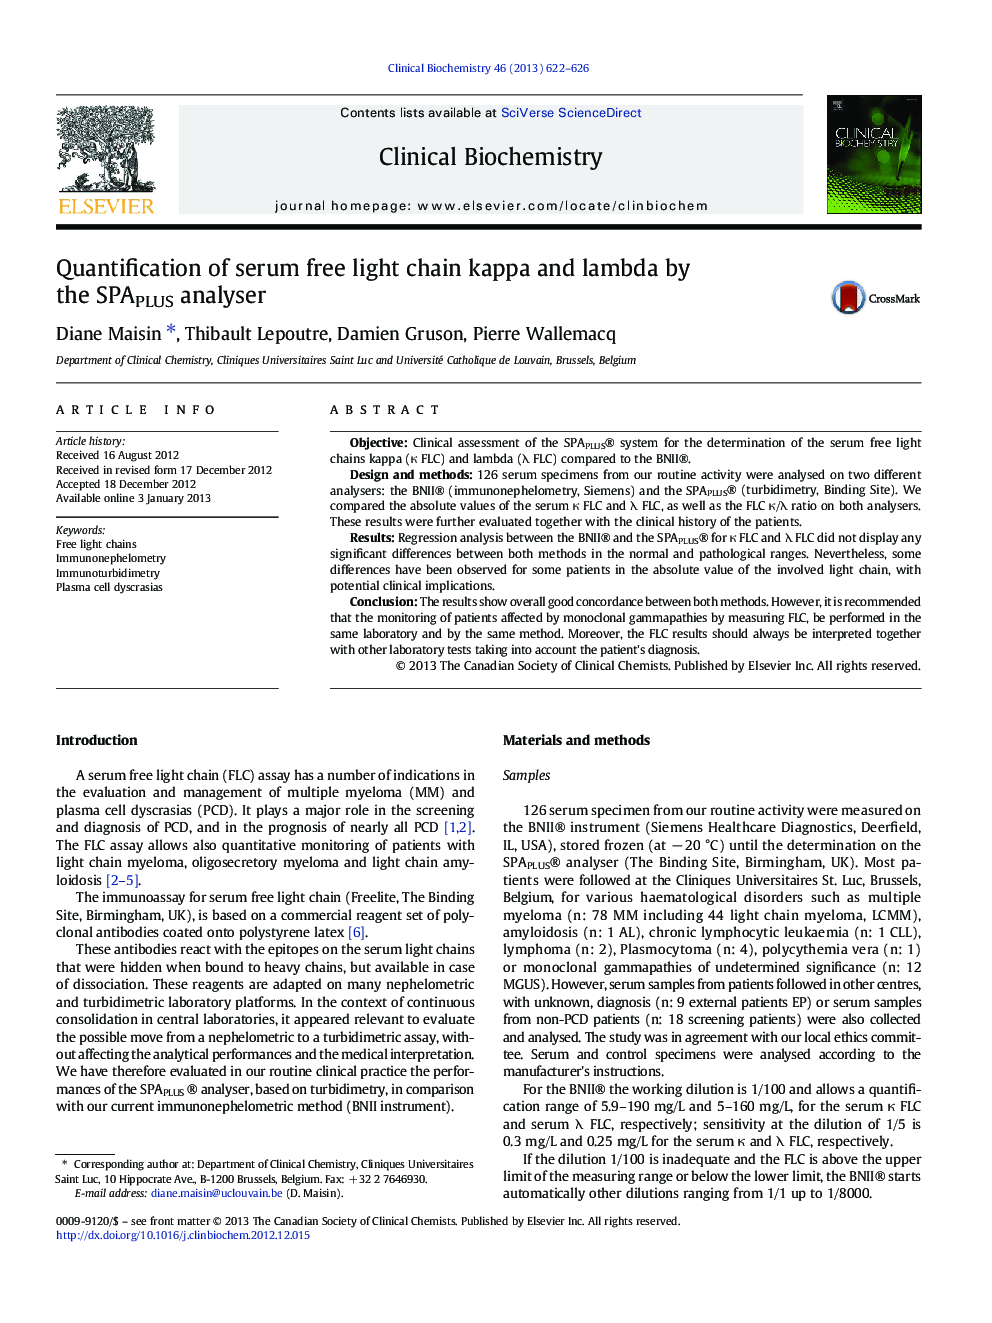 Quantification of serum free light chain kappa and lambda by the SPAPLUS analyser